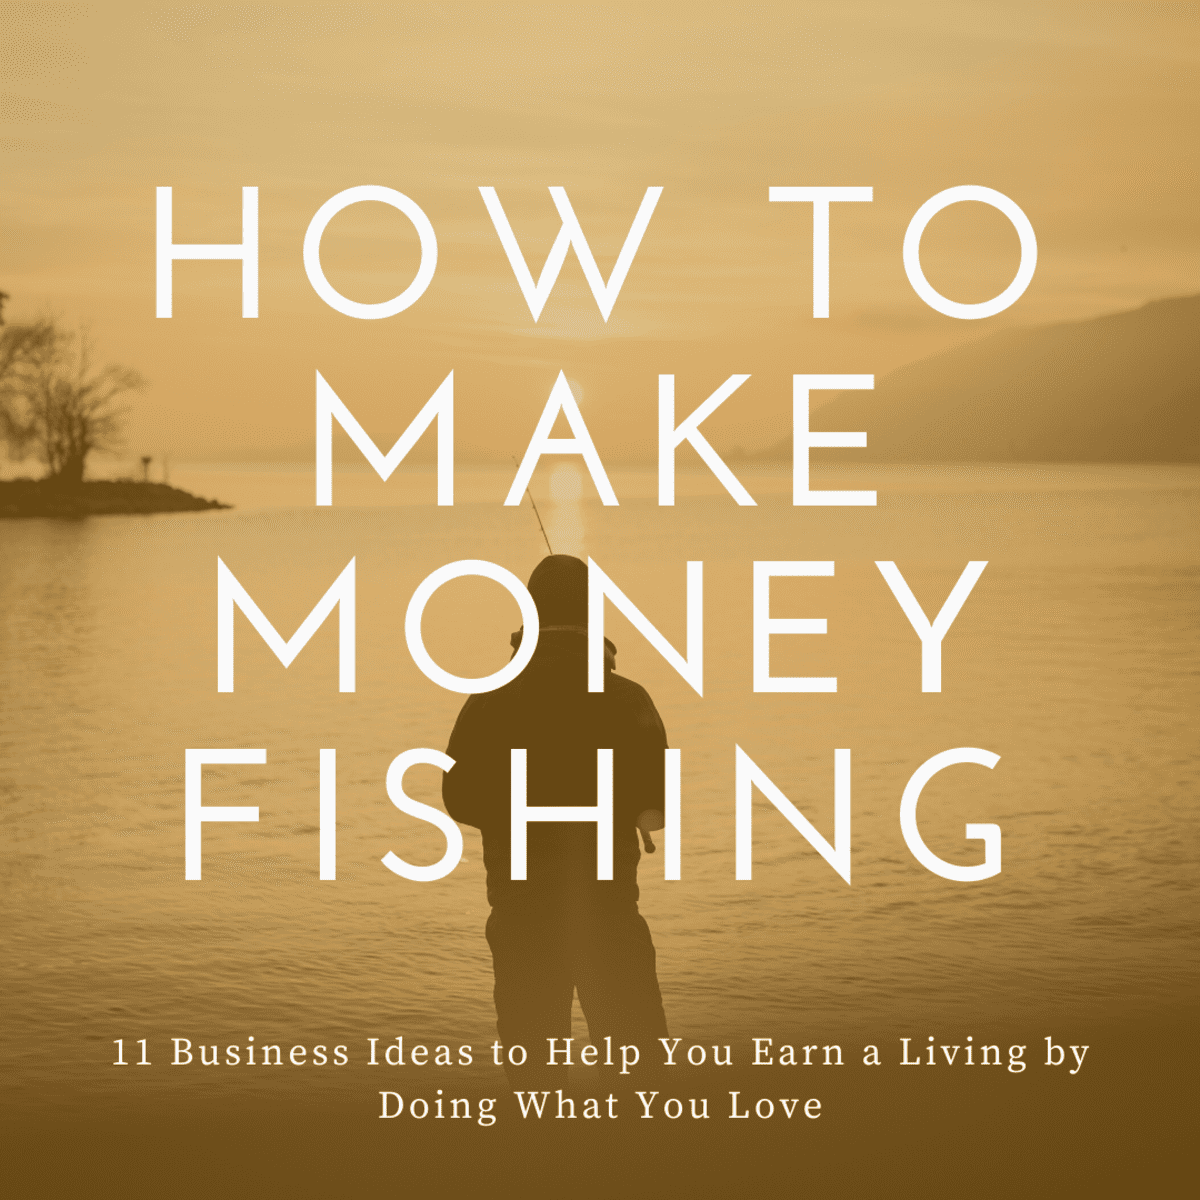 Thinking about money pt1: fishing for the win